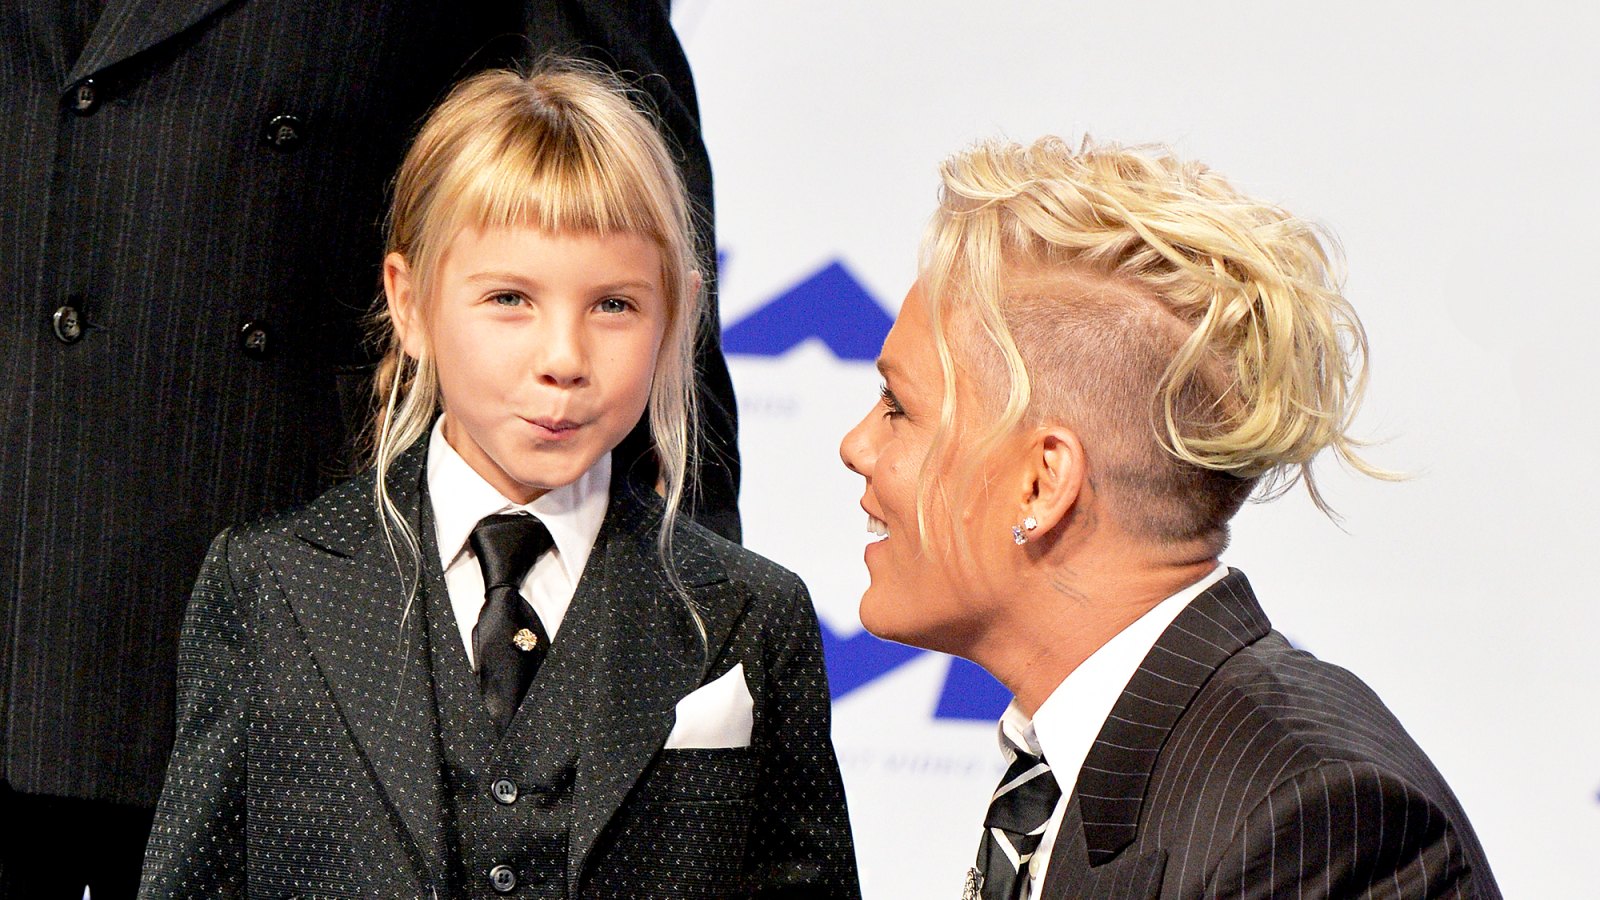 Pink and daughter Willow arrive at the 2017 MTV Video Music Awards at The Forum in Inglewood, California.